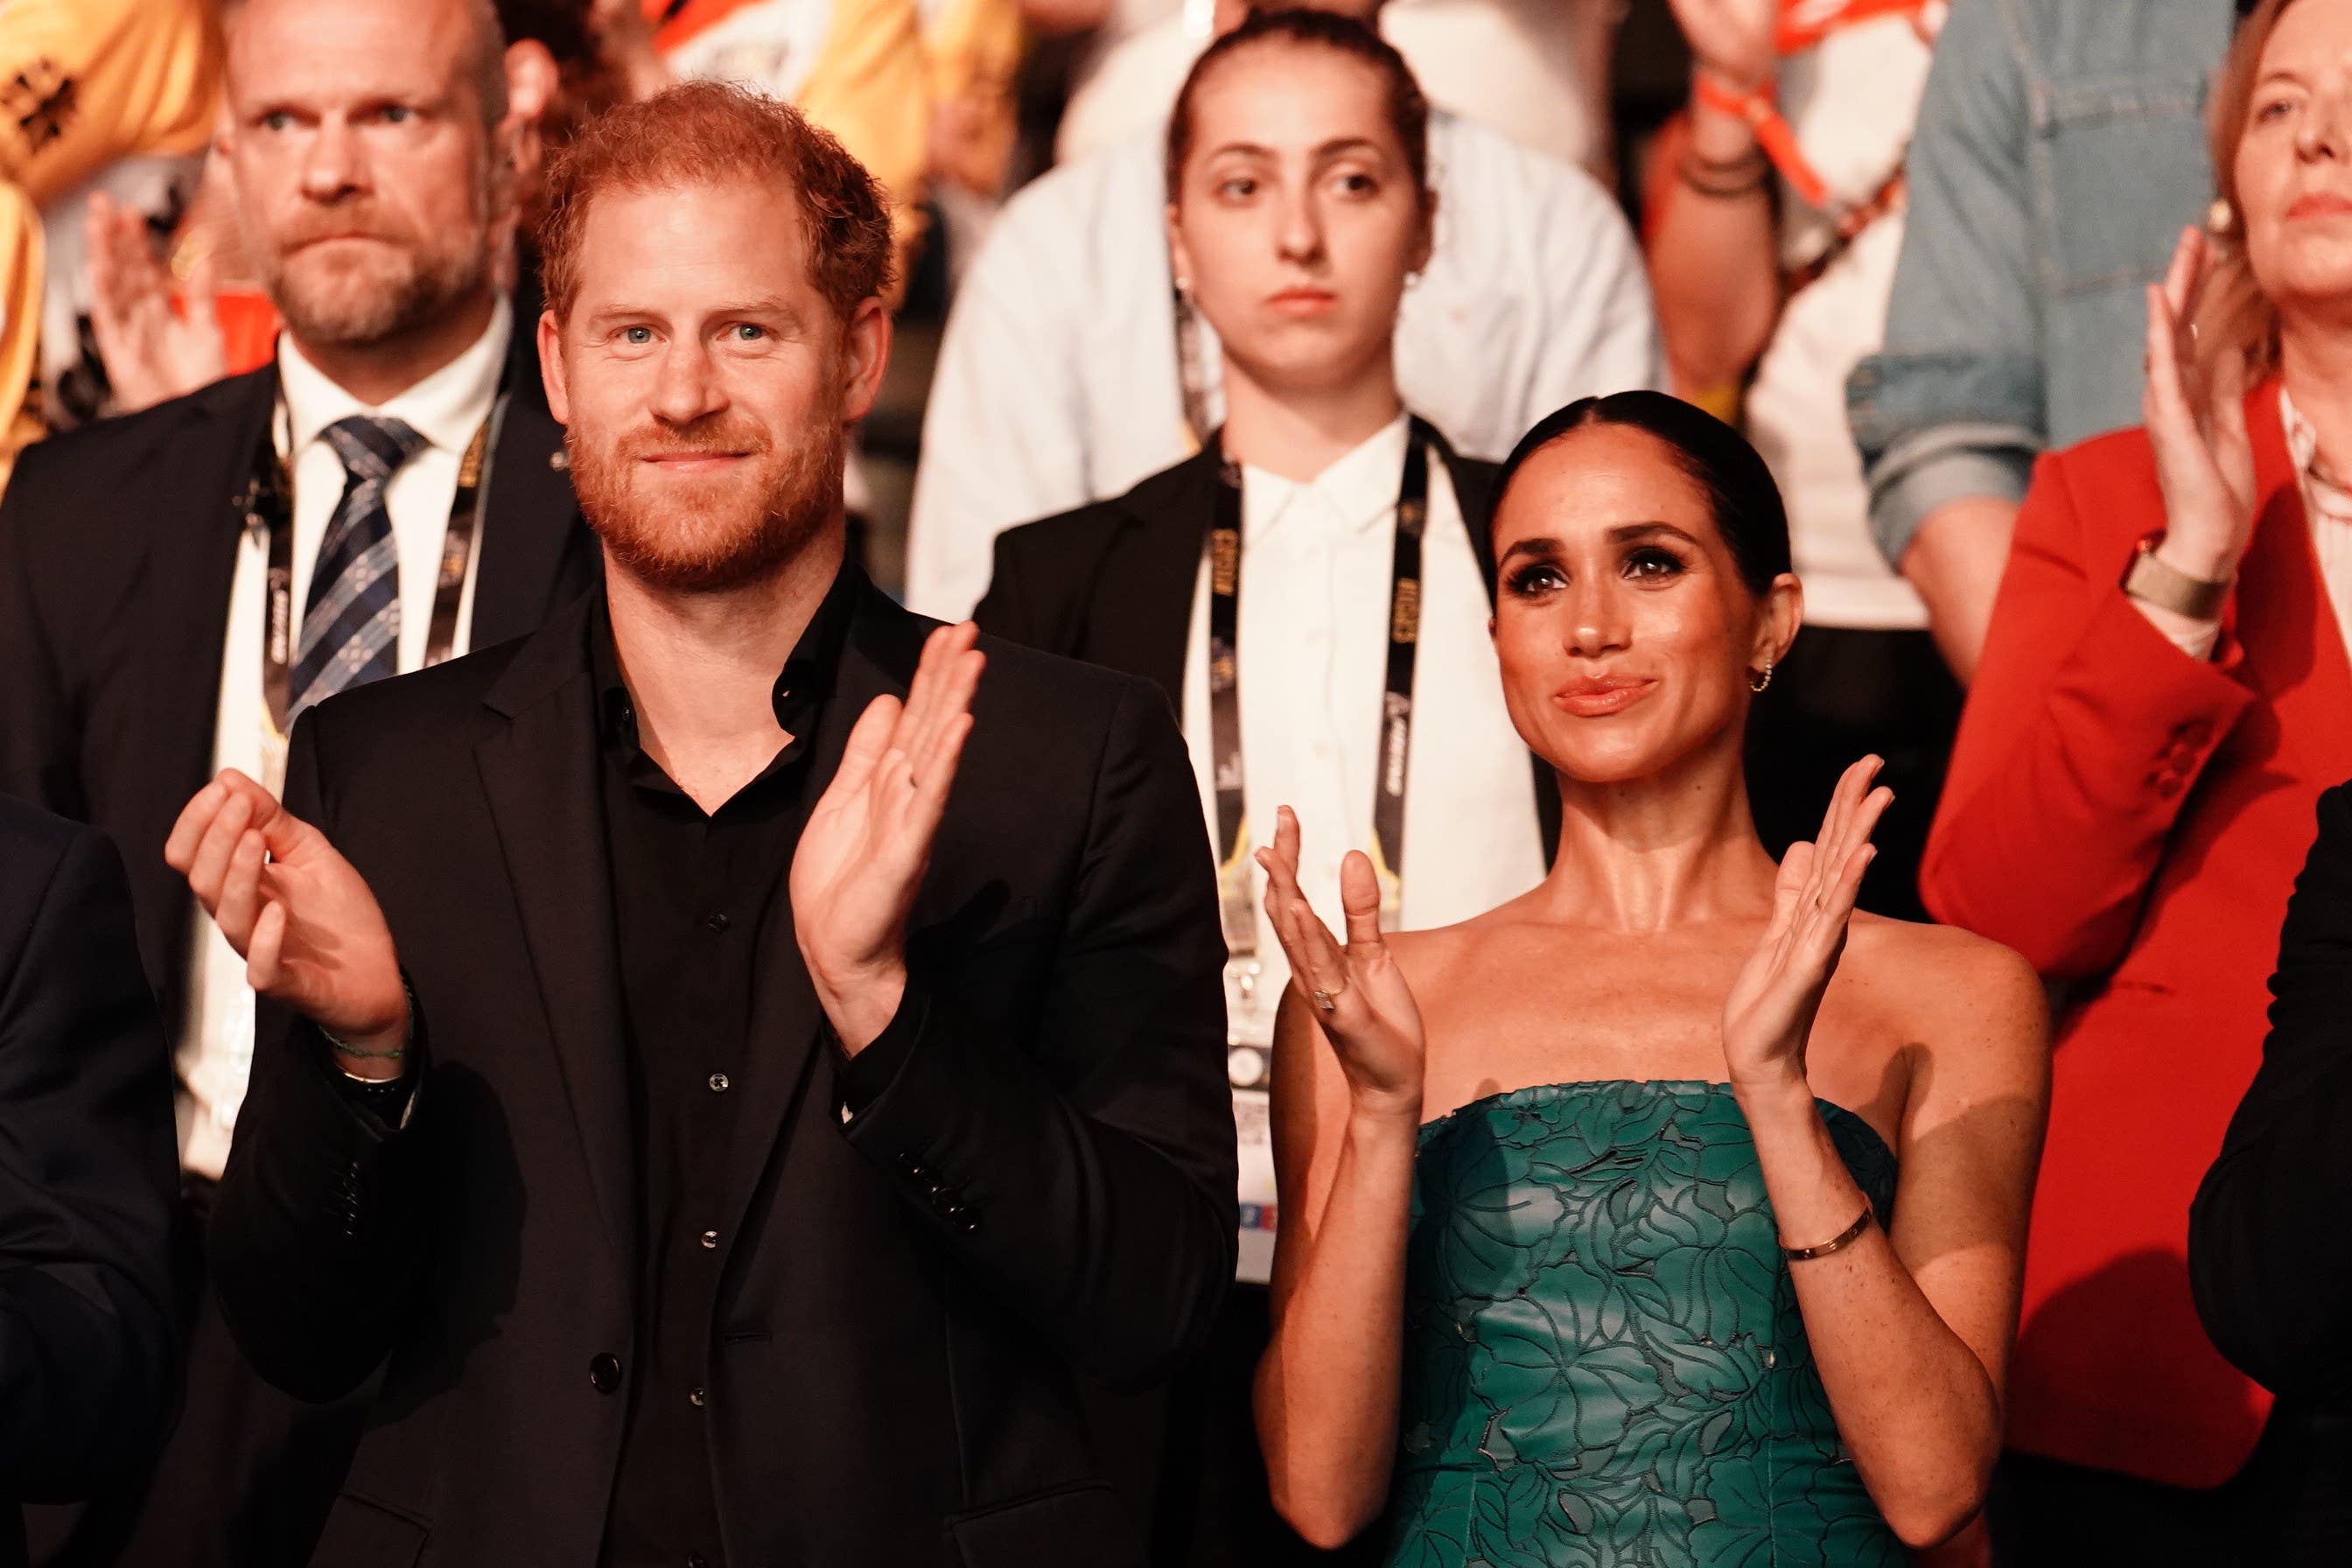 Harry and Meghan say an unidentified member of the monarchy asked about how dark Archie’s skin would be